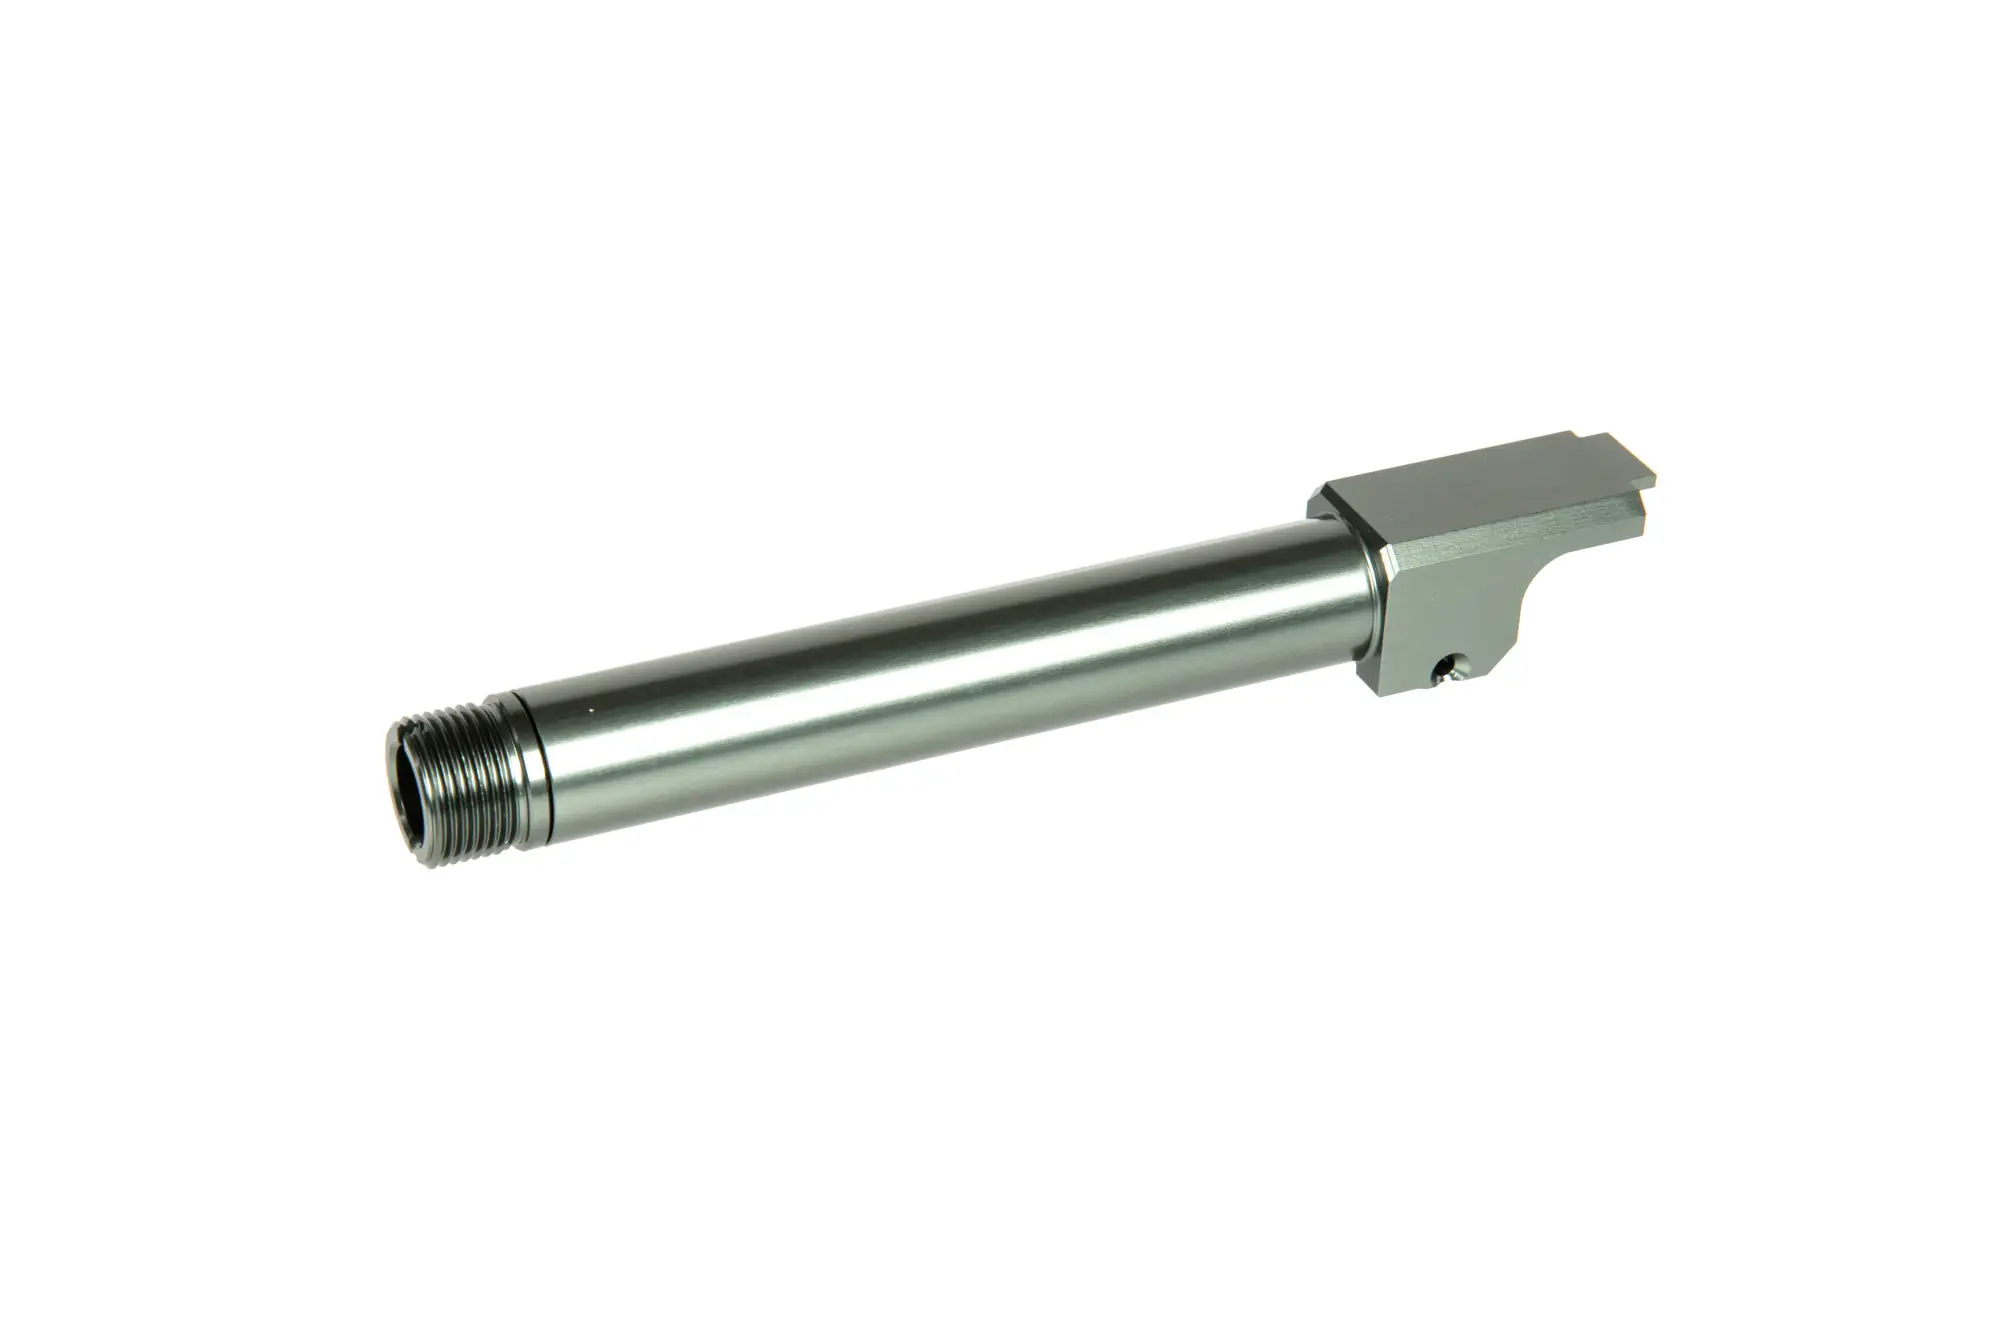 G17 Gen4 "2 Way Fixed" Non-Recoiling Outer Barrel - Gray